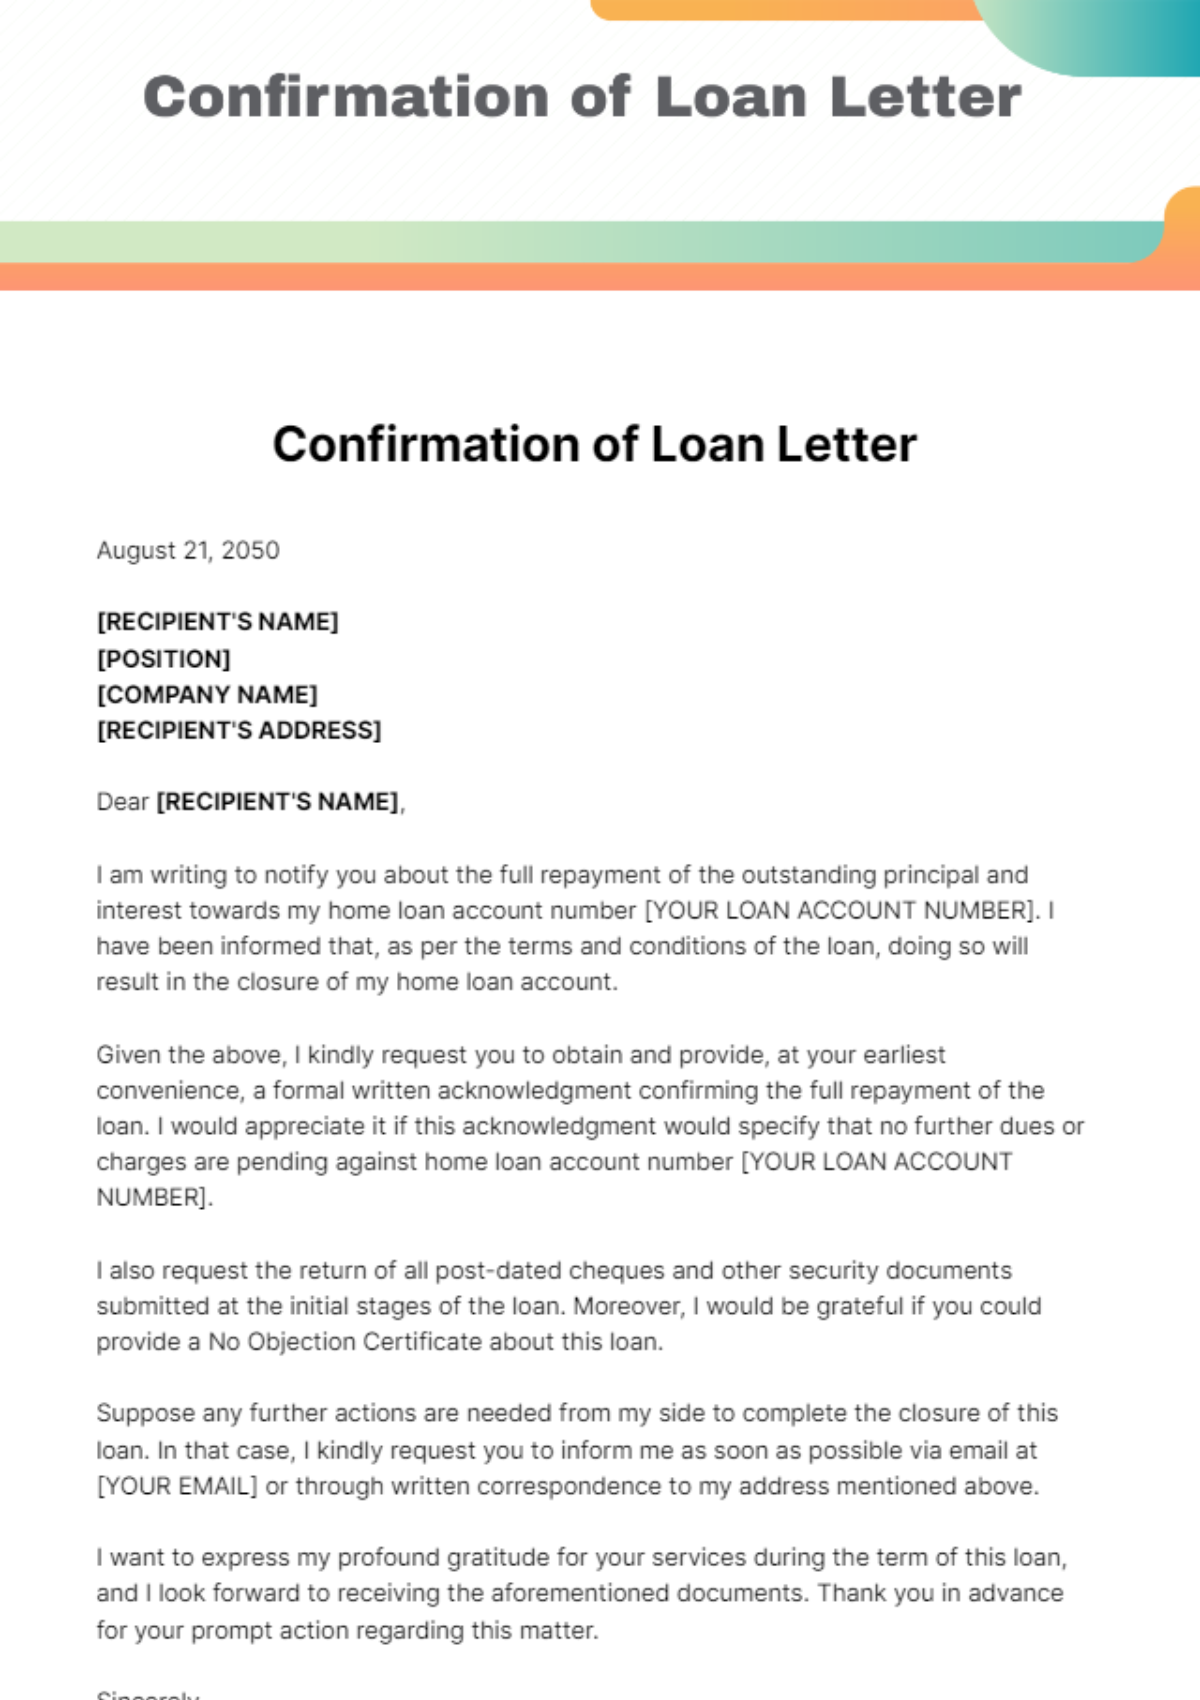 Free Confirmation of Loan Letter Template